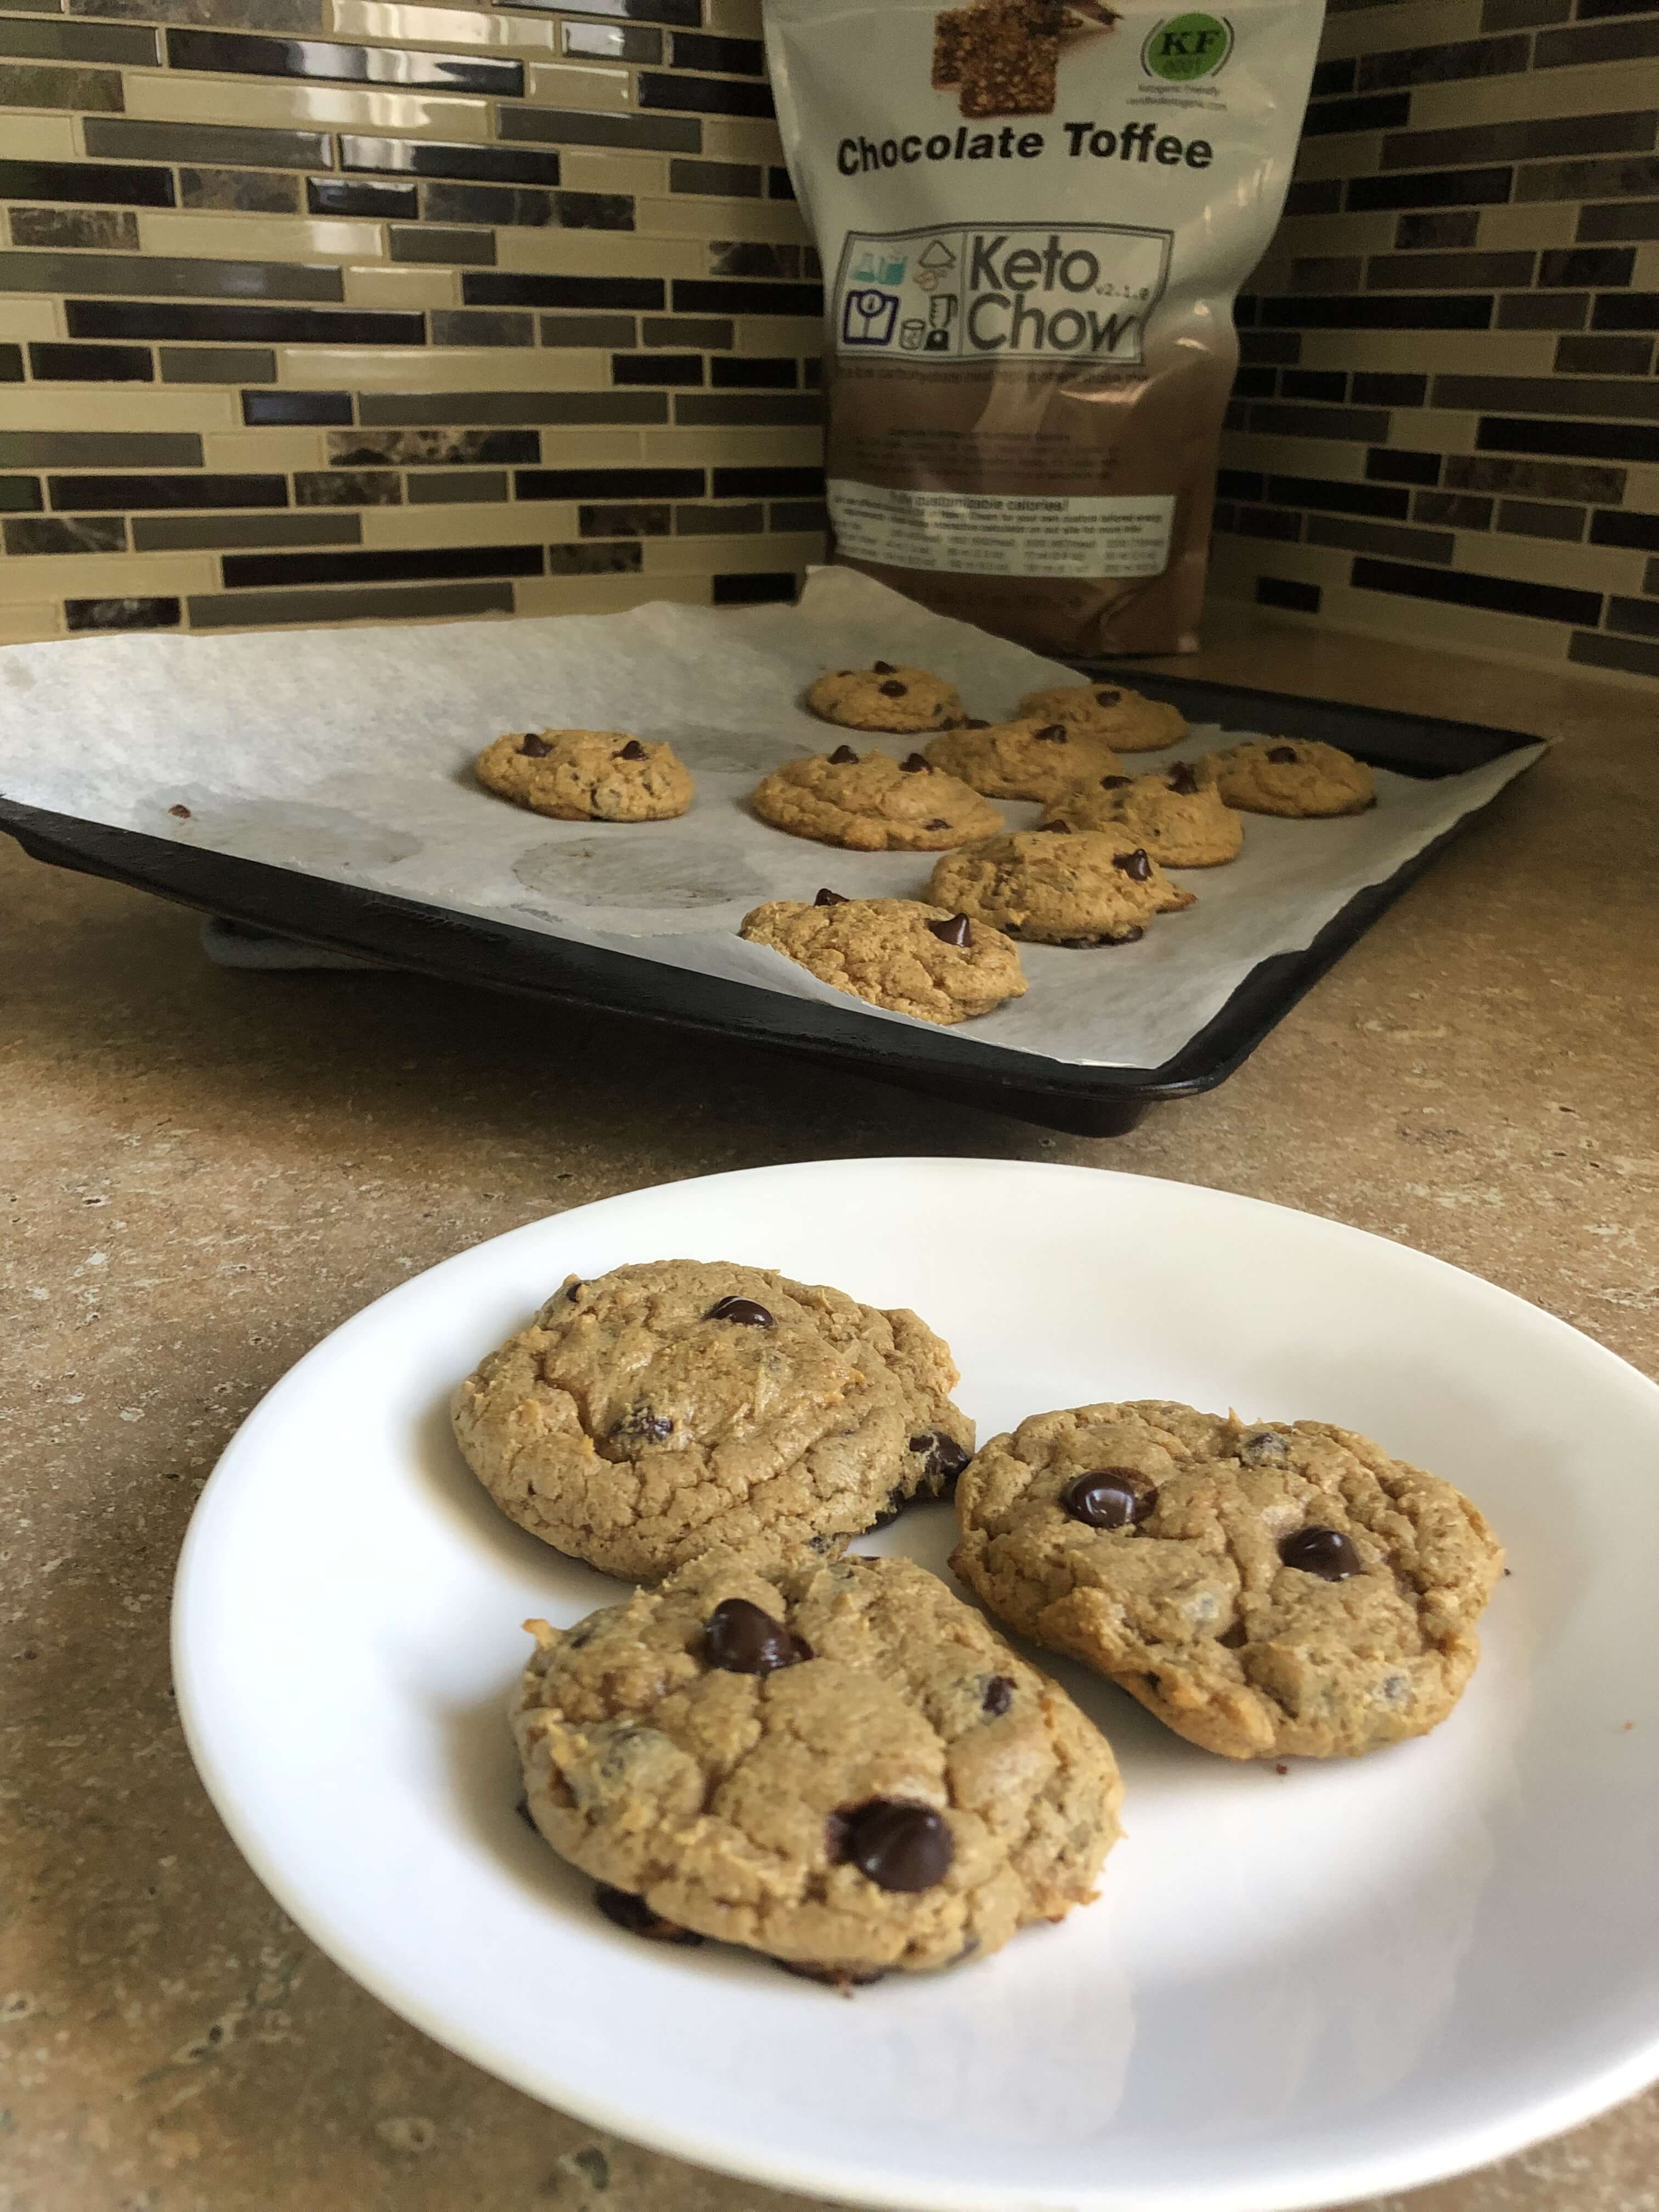 Keto Chow Toffee (or Vanilla) chocolate chip cookies